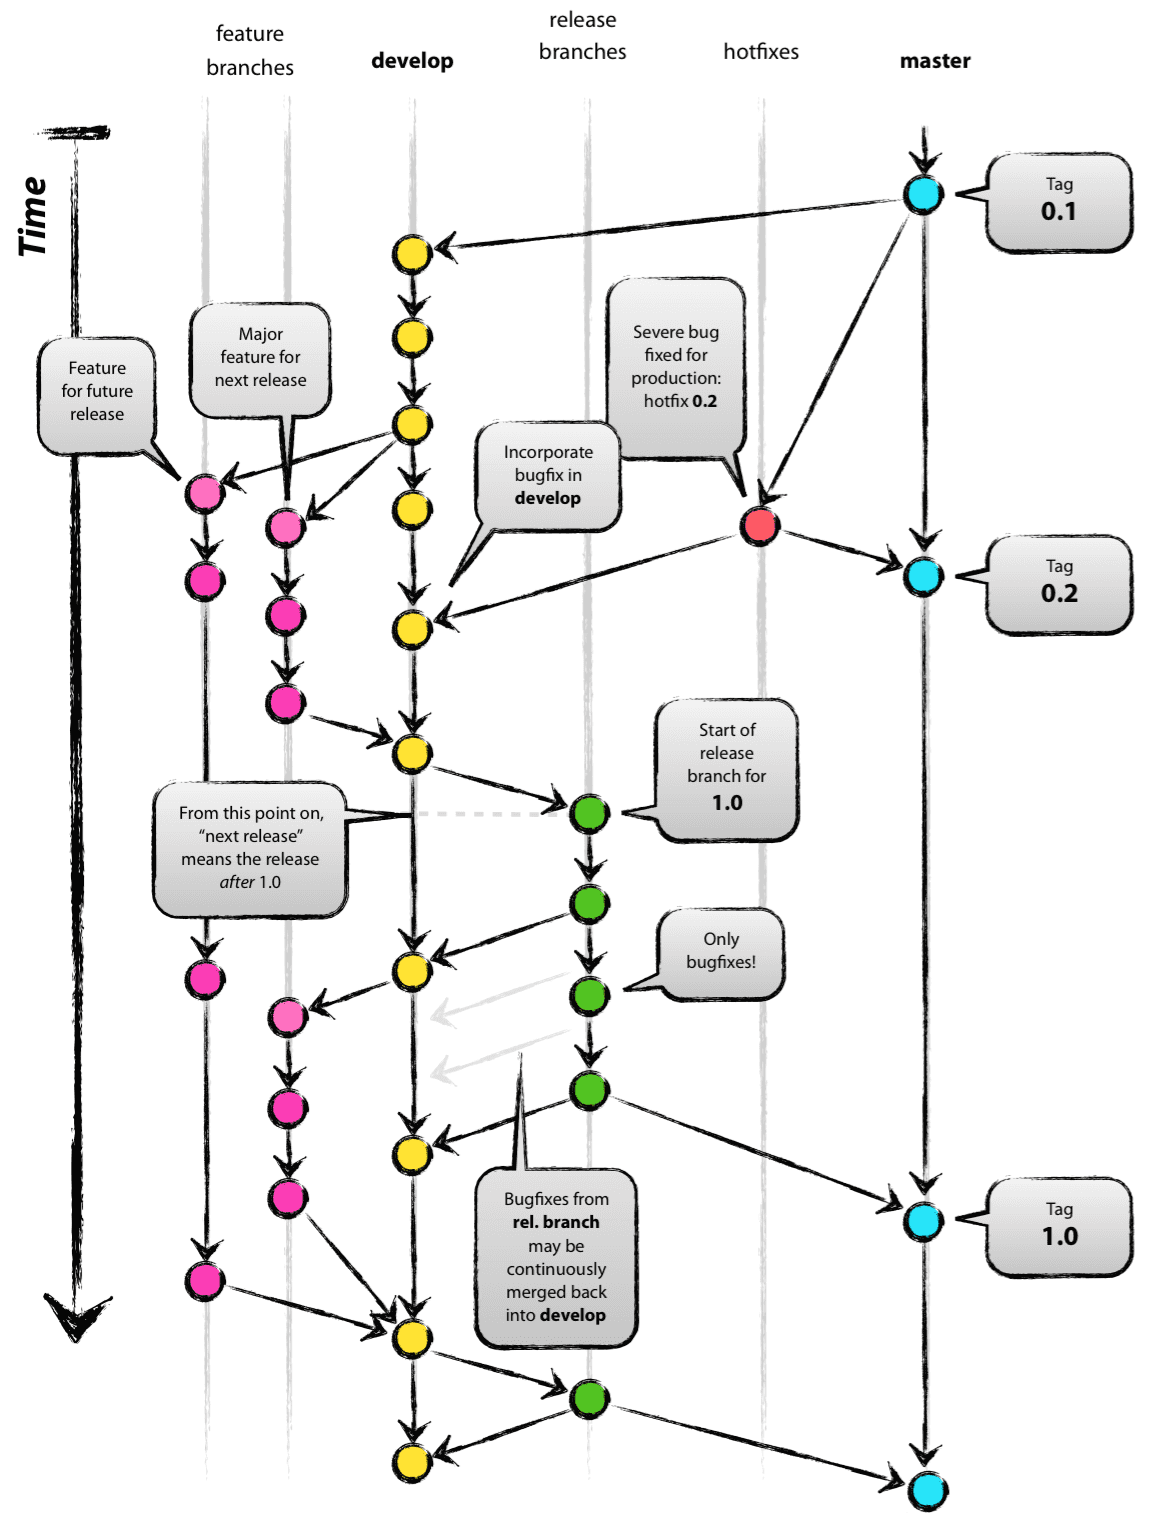 Image of Git branching model by Vincent Driessen